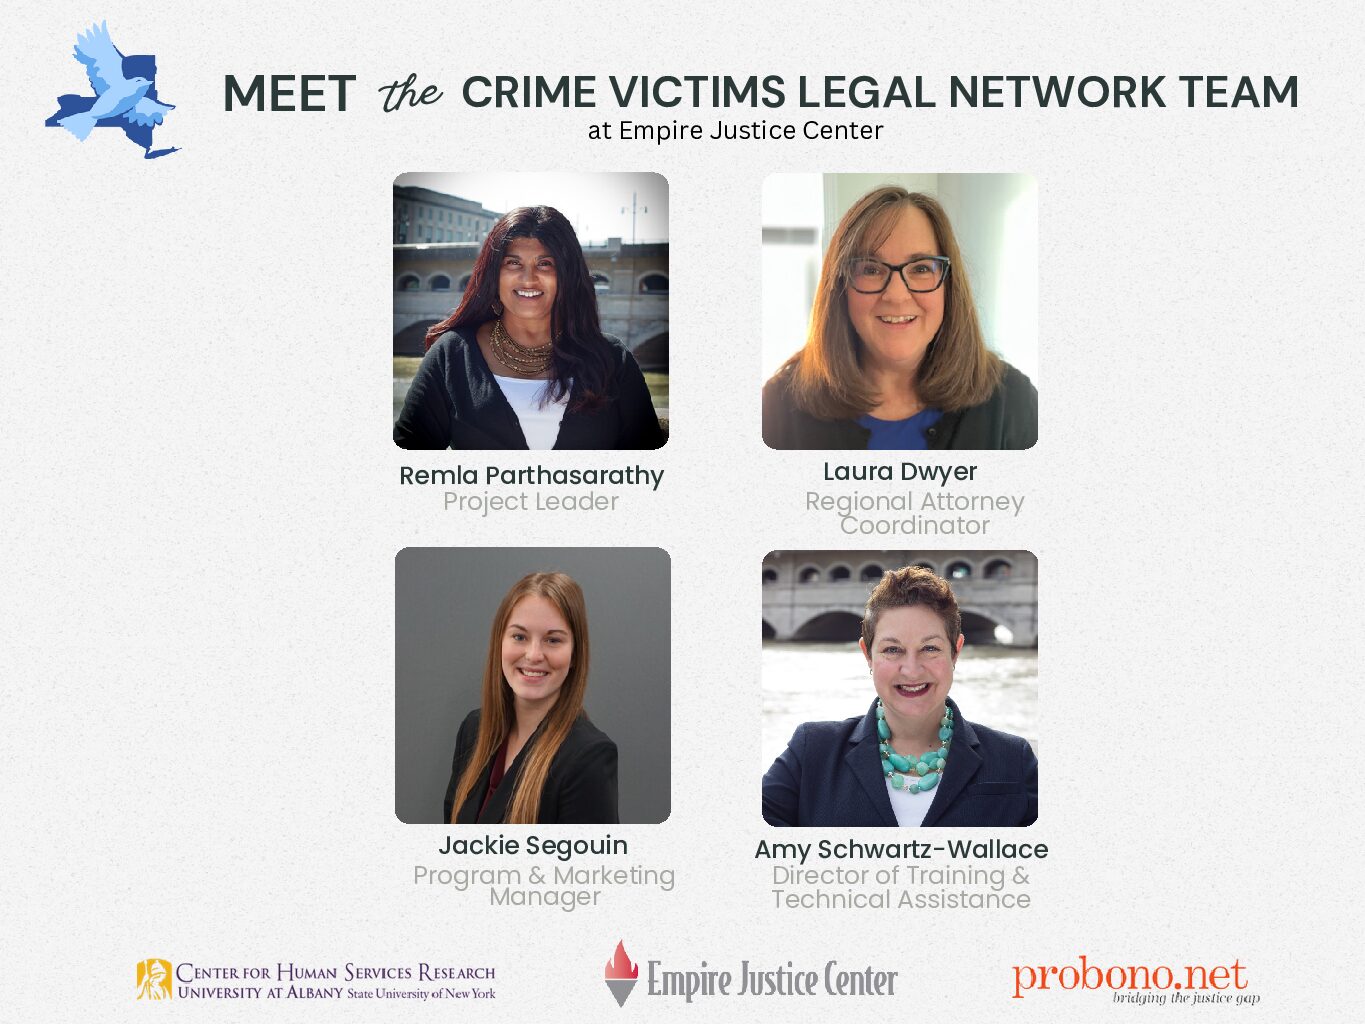 The Crime Victims Legal Network at Empire Justice Center